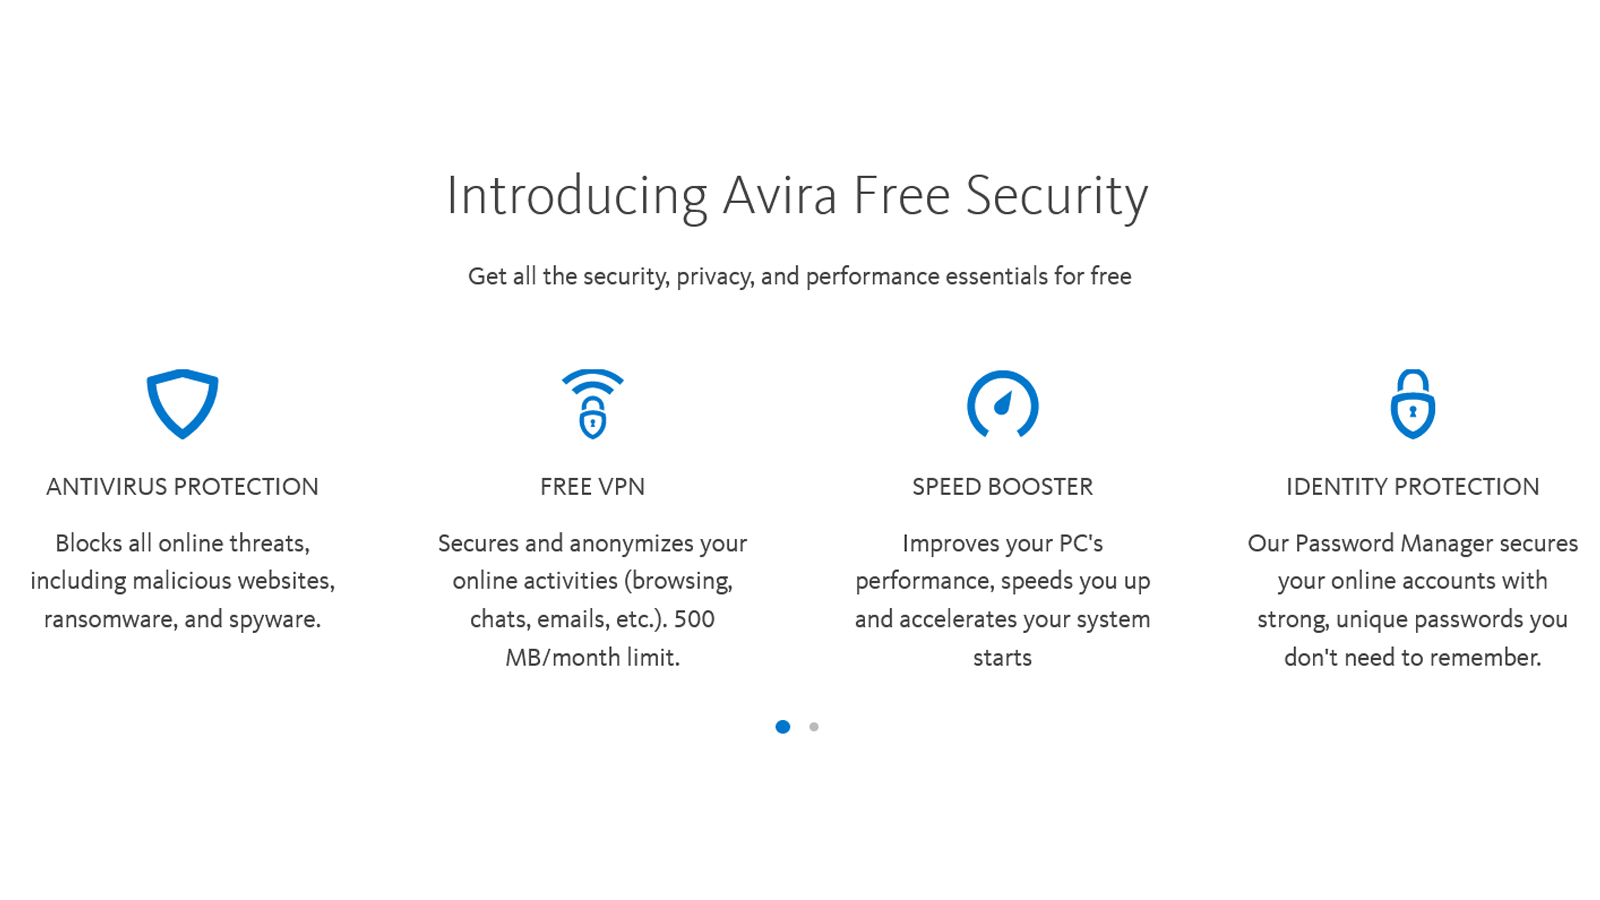 Find detailed information about Avira